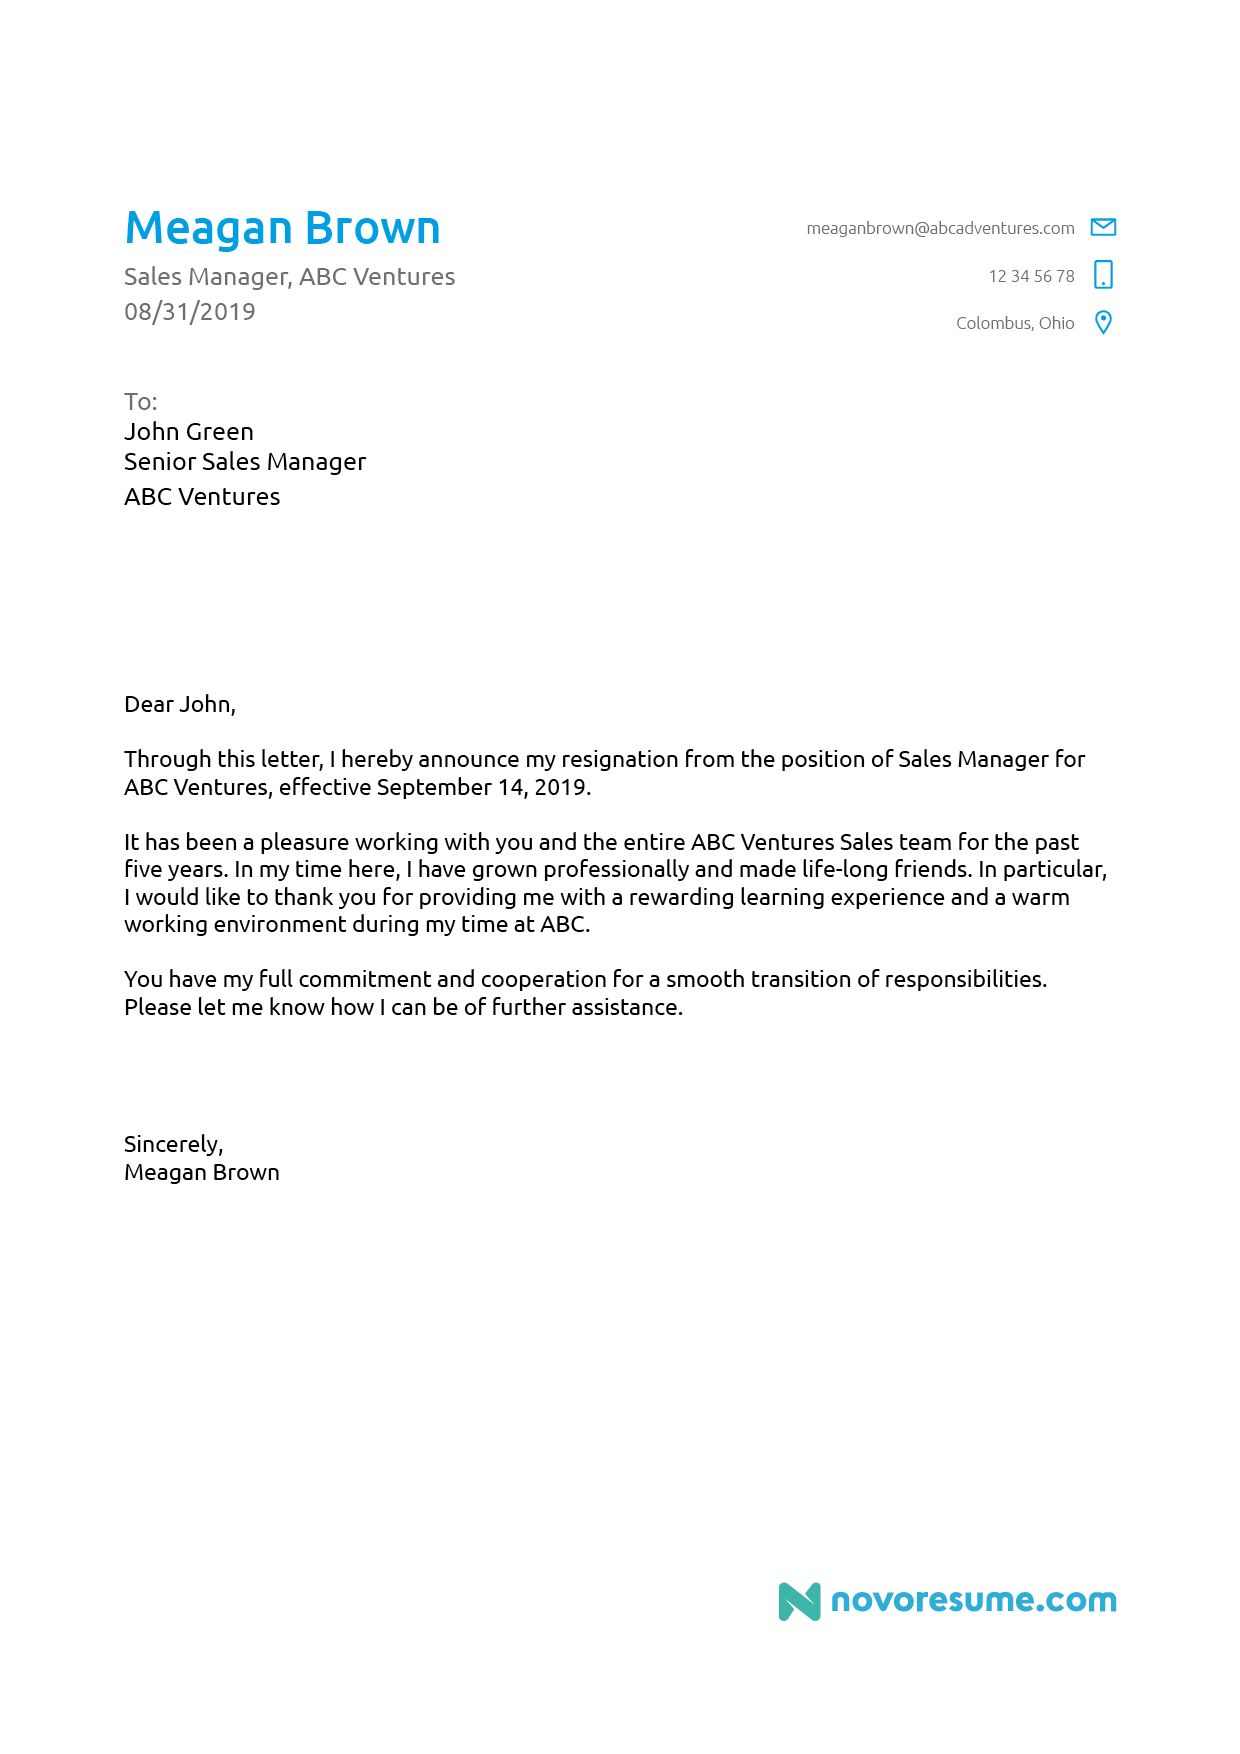 How To Write A Letter Of Resignation – 2020 Extensive Guide Regarding Draft Letter Of Resignation Template